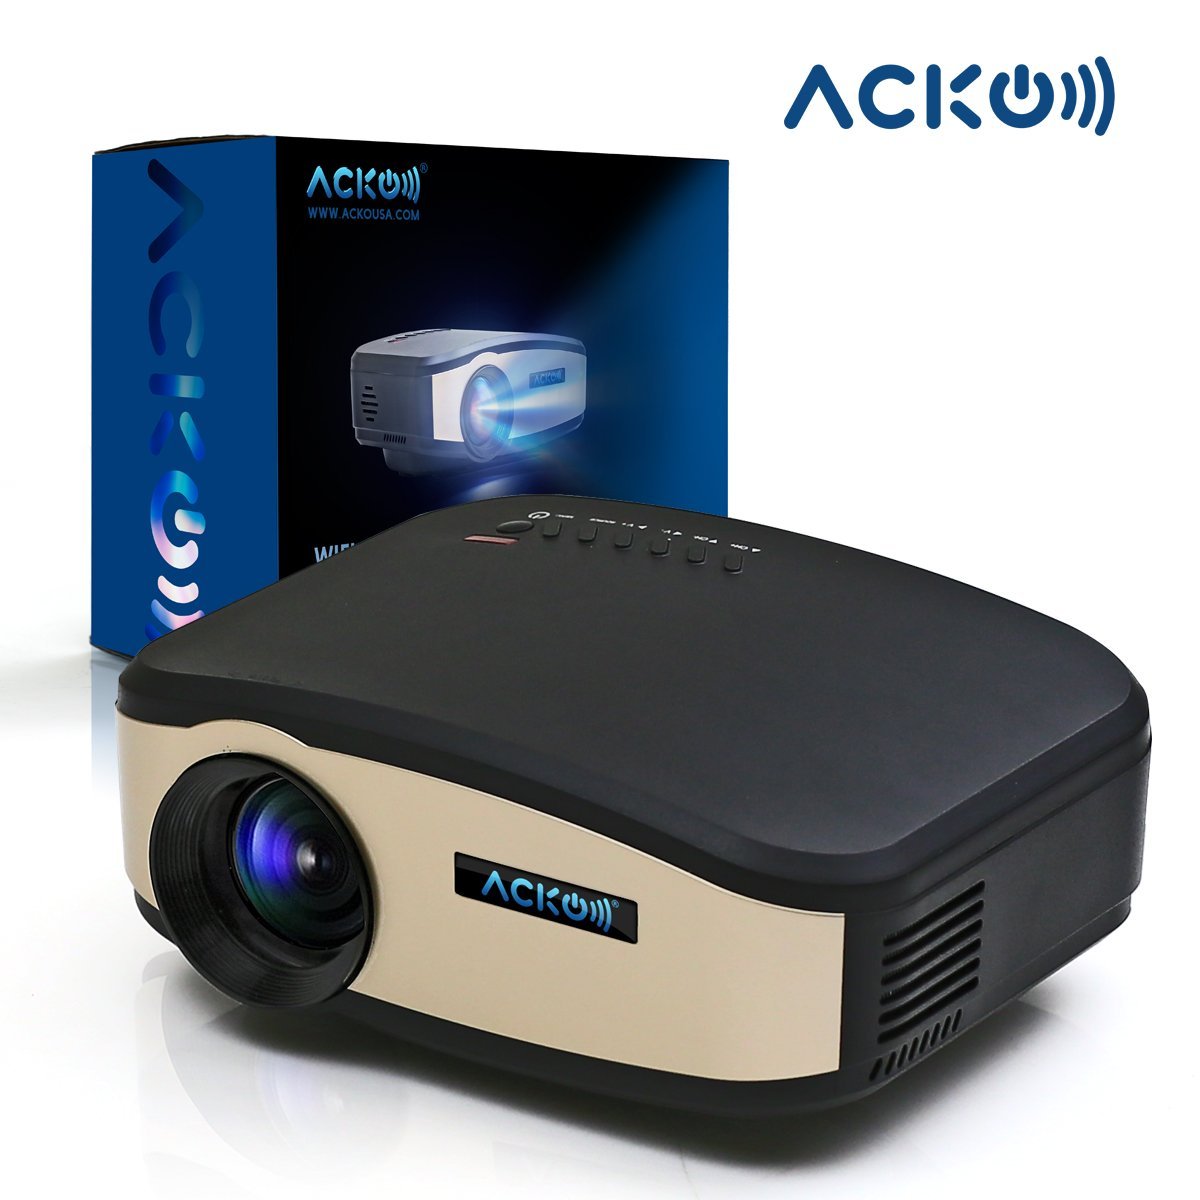 Acko Wi-Fi LED projector